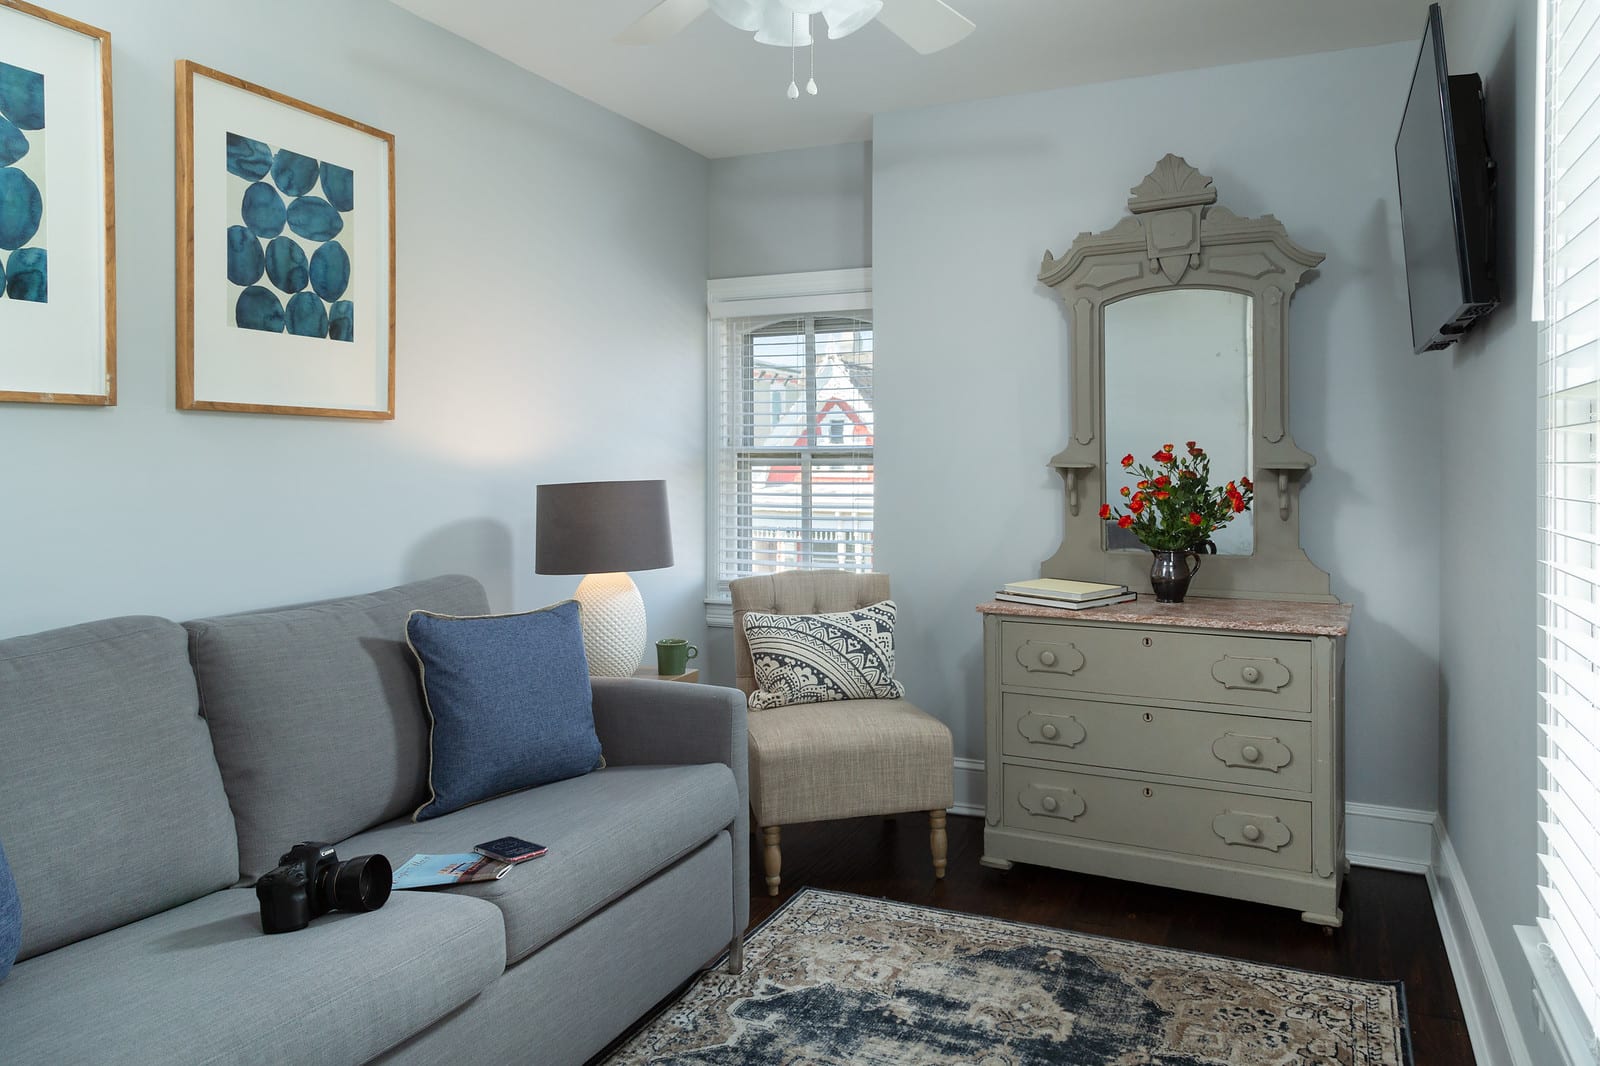 Pale blue guest room with sofa, chair and dresser.